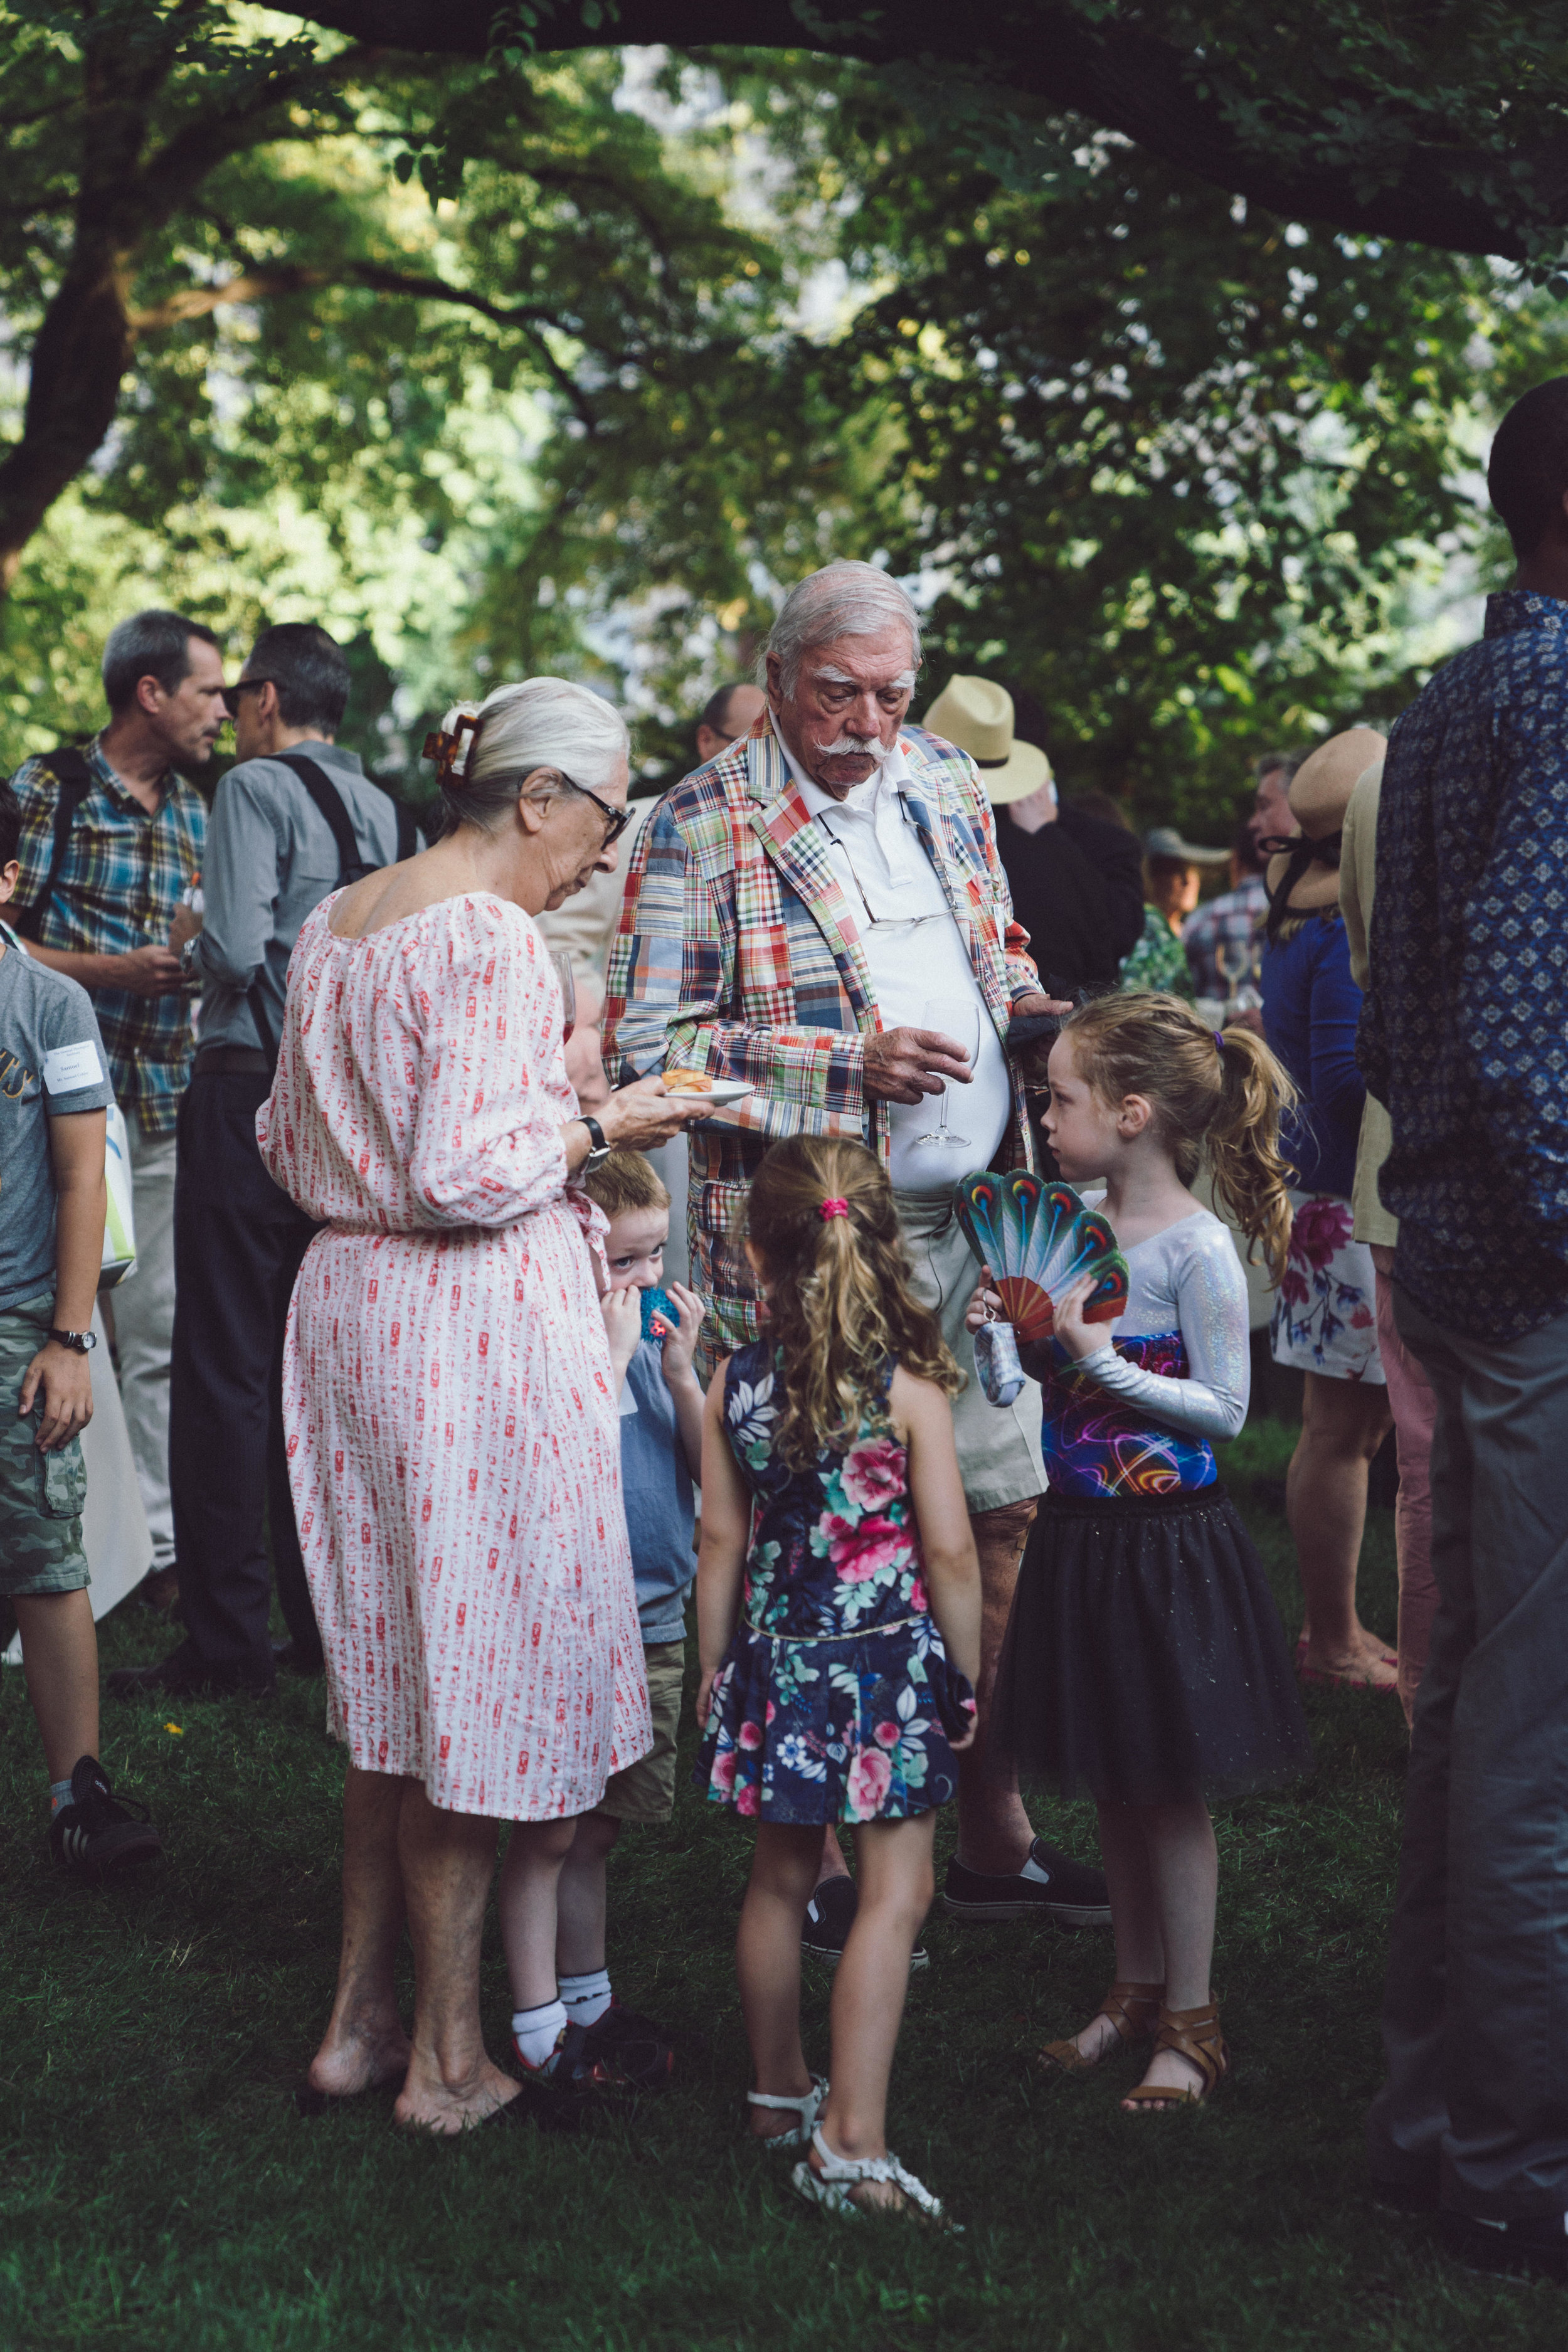  Attendees of The General Seminary's Annual Garden Party. Photo by Daniel Lee 